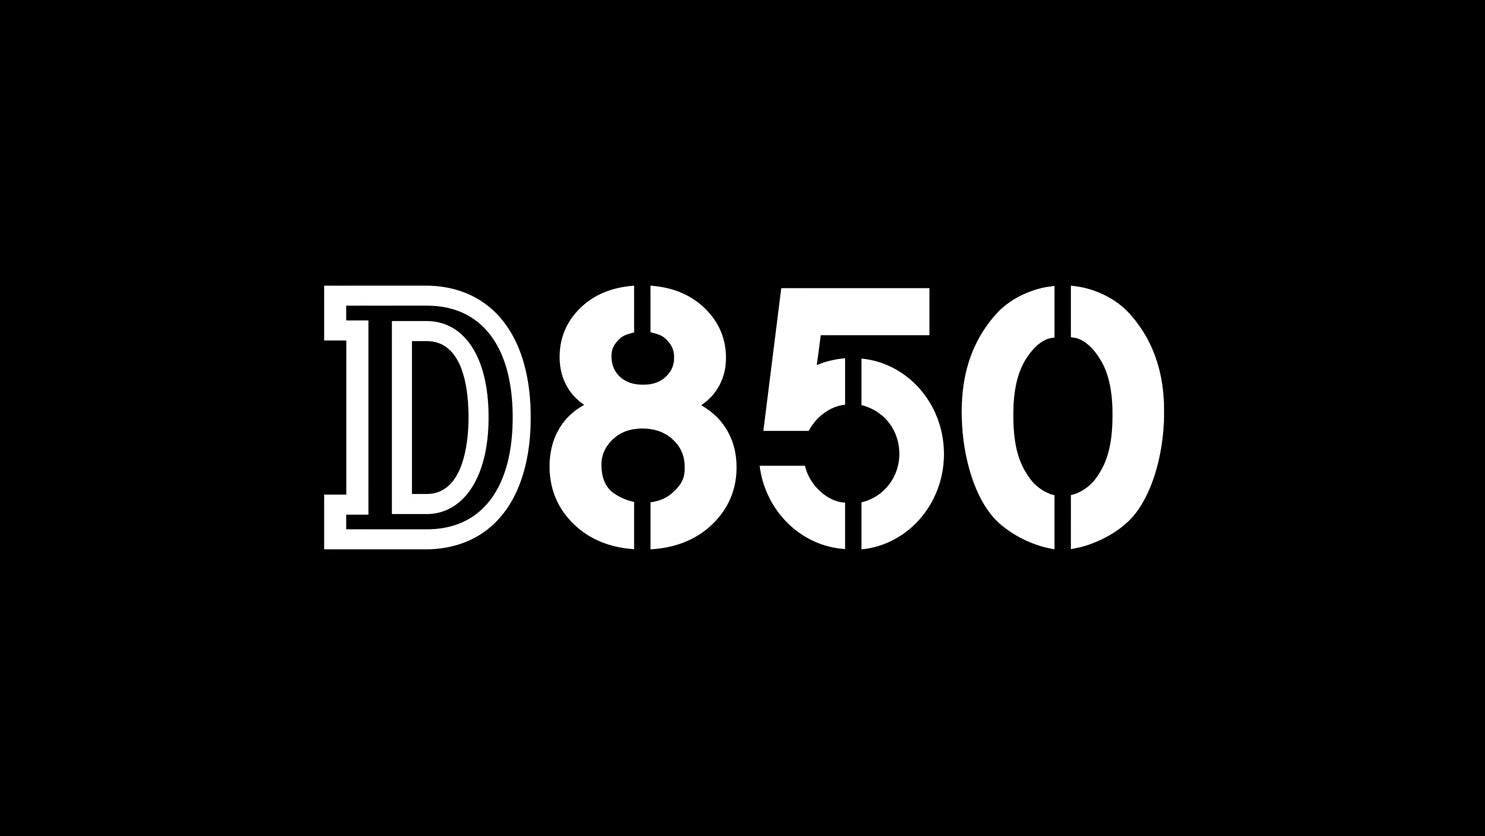 Nikon D850 What To Expect